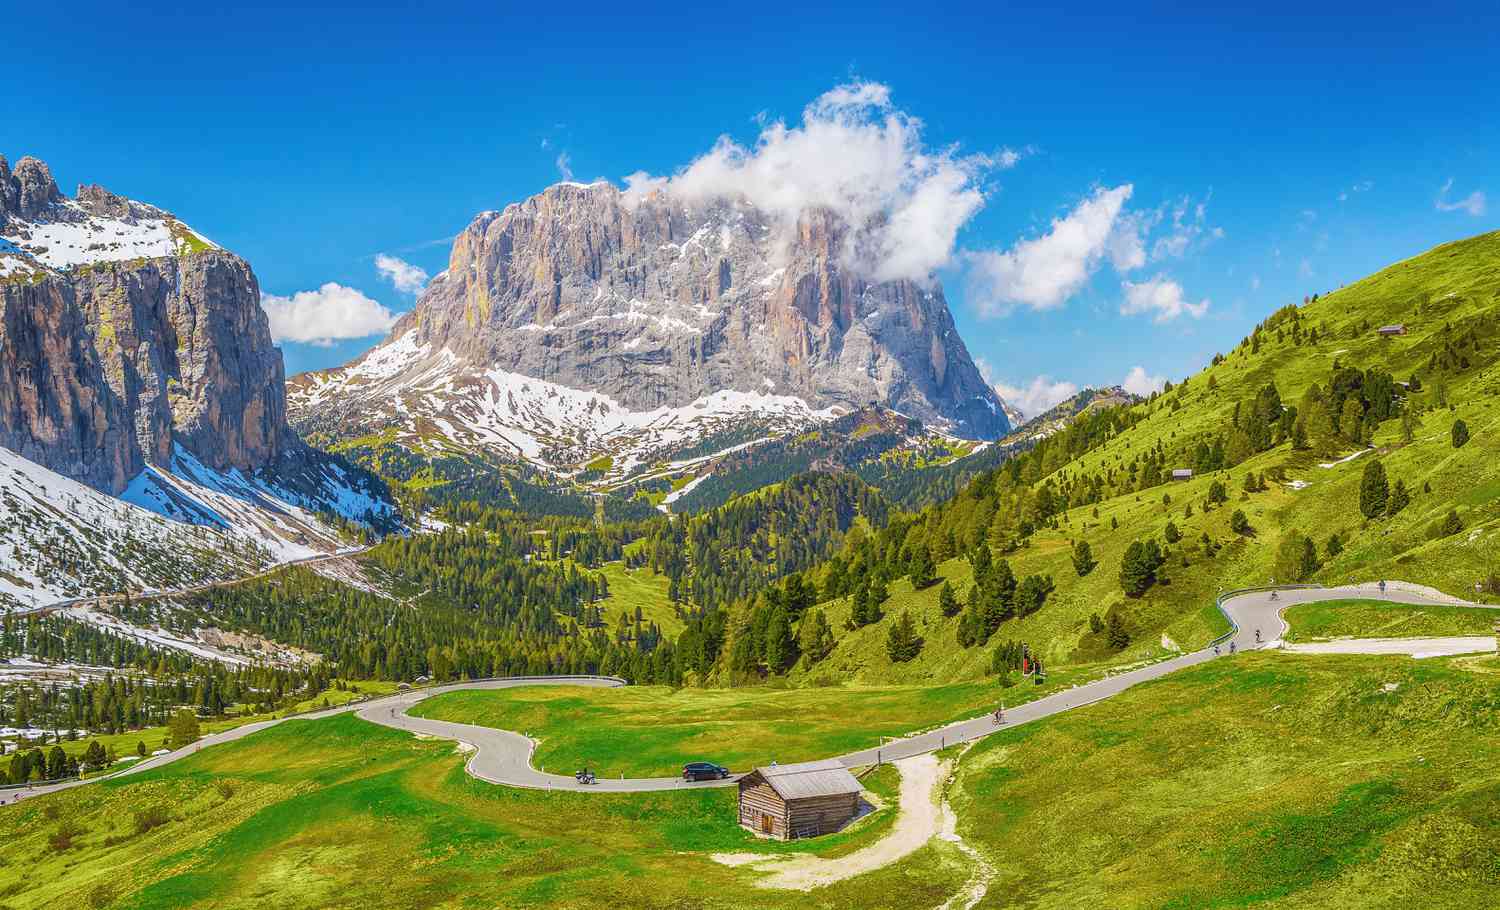 how-to-get-to-the-dolomites-italy-car-bus-train-or-plane